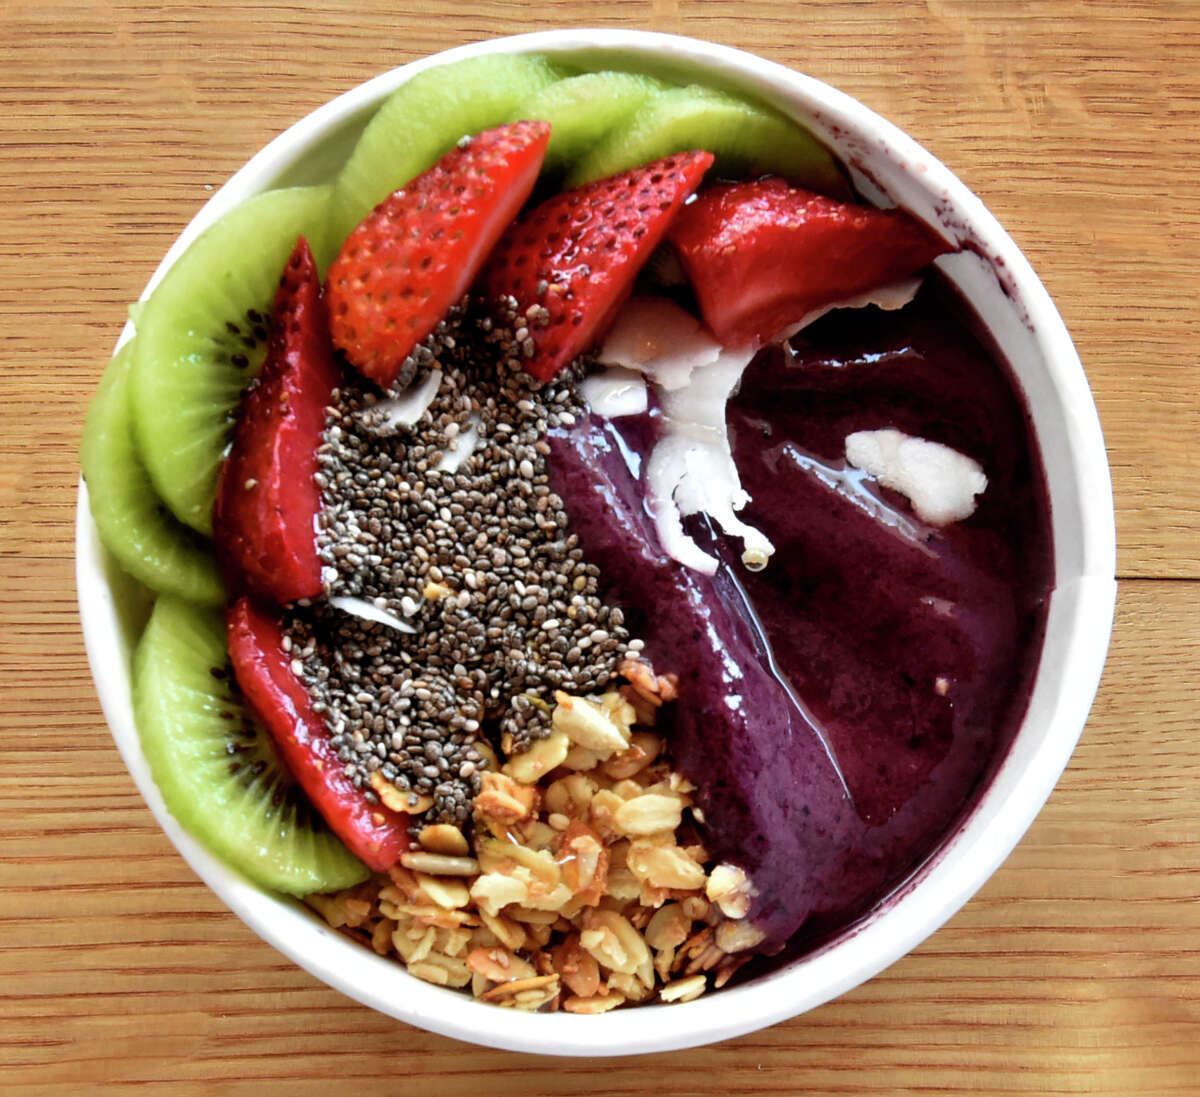 Madison, Connecticut - Friday, June 28, 2019: "Kiwi's Playhouse" is an acai bowl whose ingredients include a blend of acai, blueberries, mango pineapple, banana, lime, coconut water with toppings of kiwi, strawberries, chia seeds, granola, coconut, and honey and can be found at Life Bowls in Madison that offers Acai bowls, smoothies and fine coffee. Acai bowls have blended Acai berries from Brazil that is known to have a high content of antioxidants and no sugar.